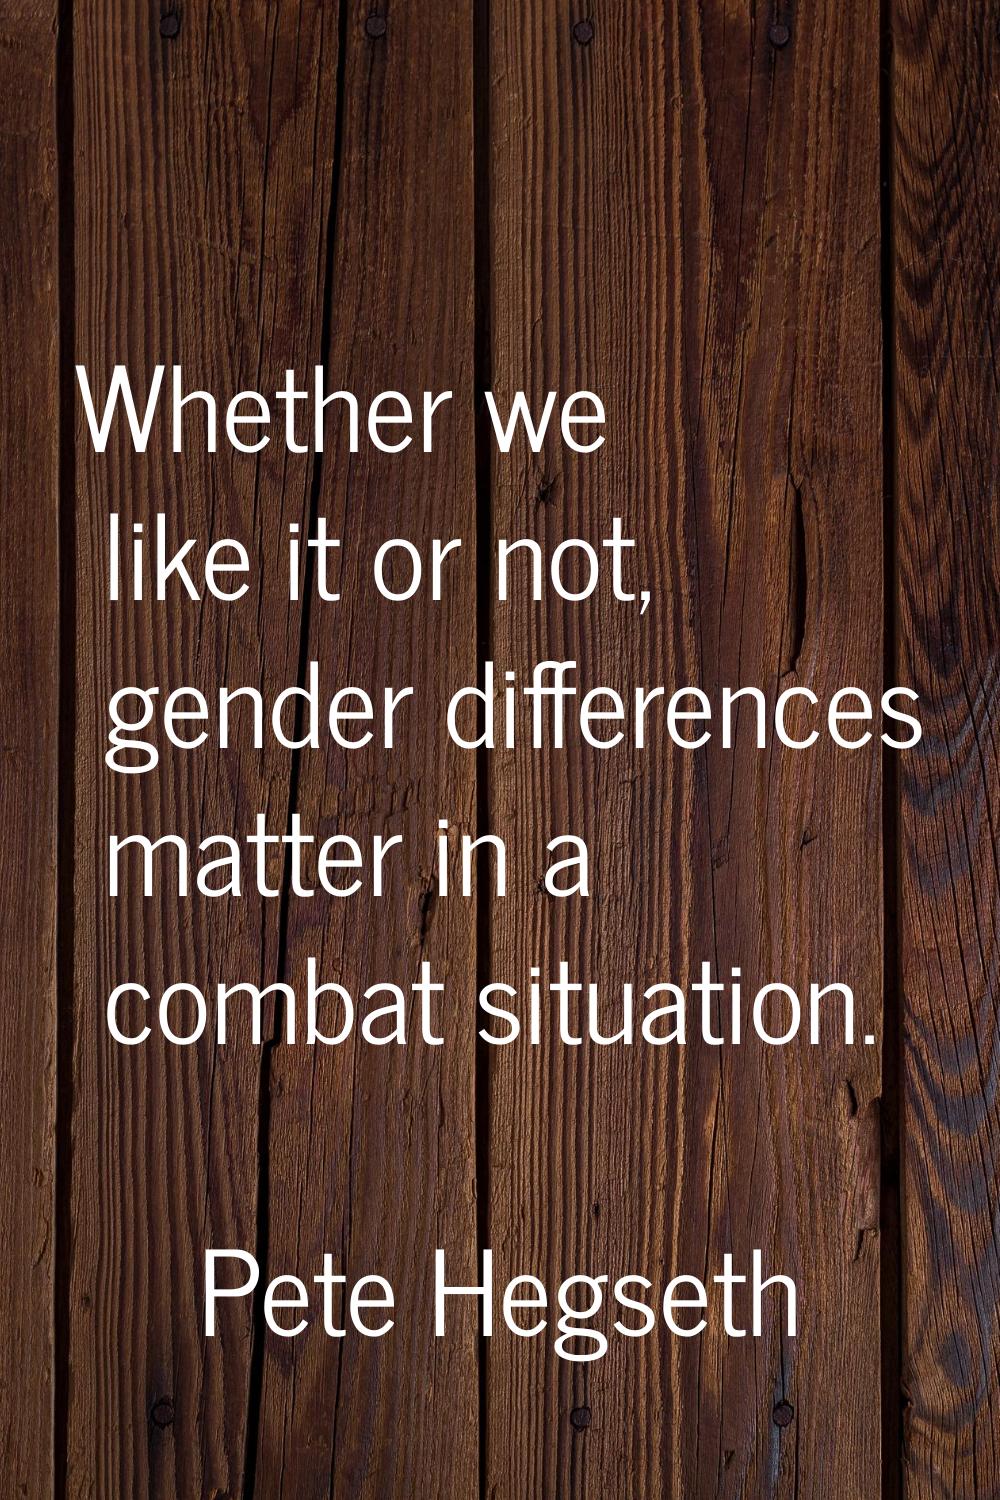 Whether we like it or not, gender differences matter in a combat situation.